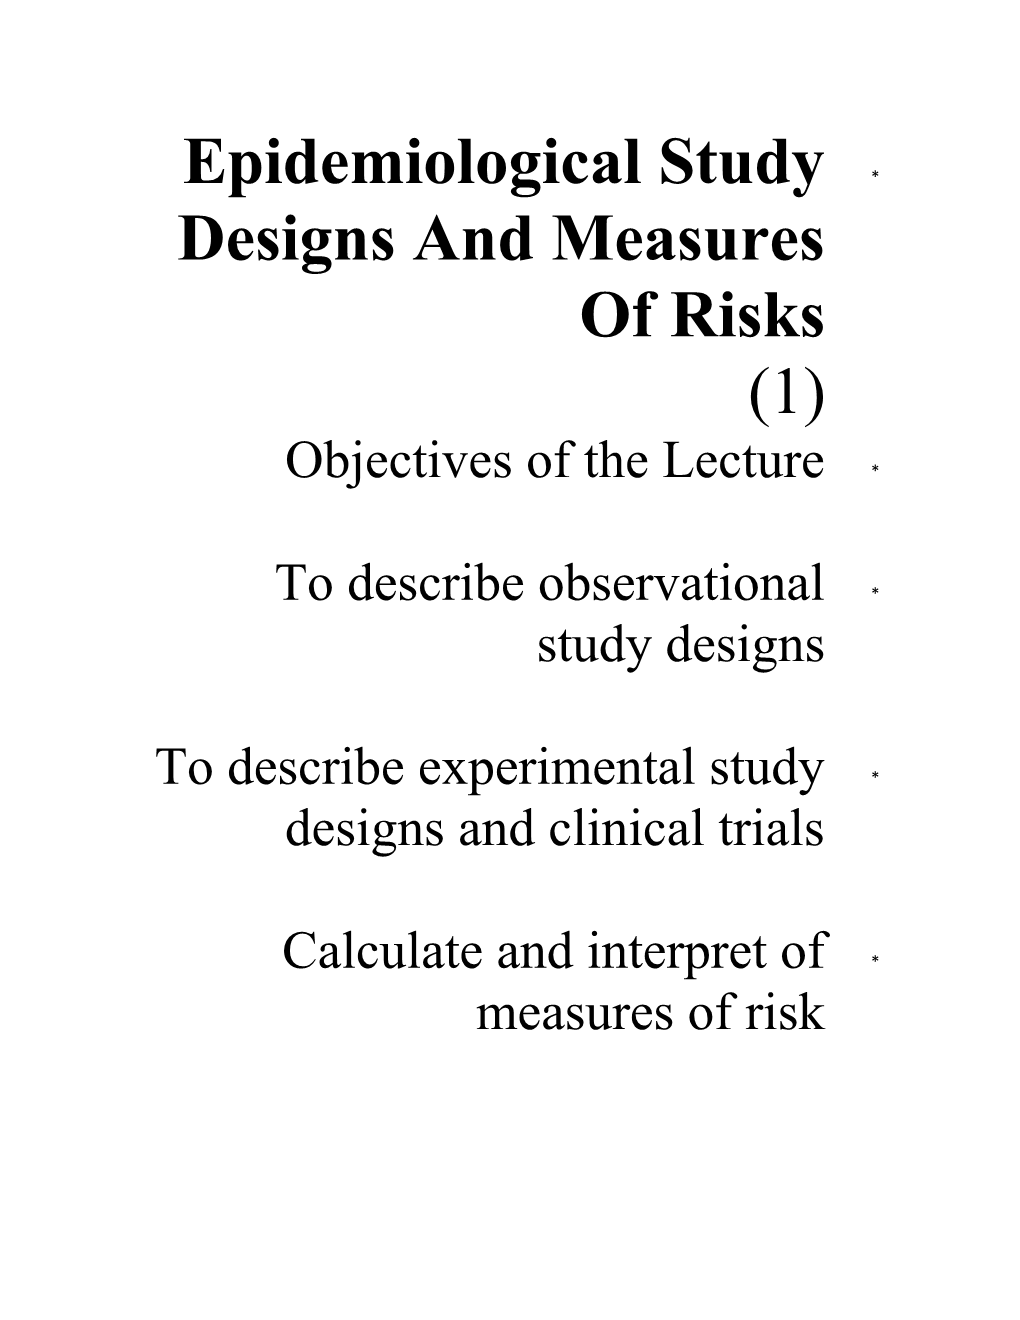 Epidemiological Study Designs and Measures of Risks (1)